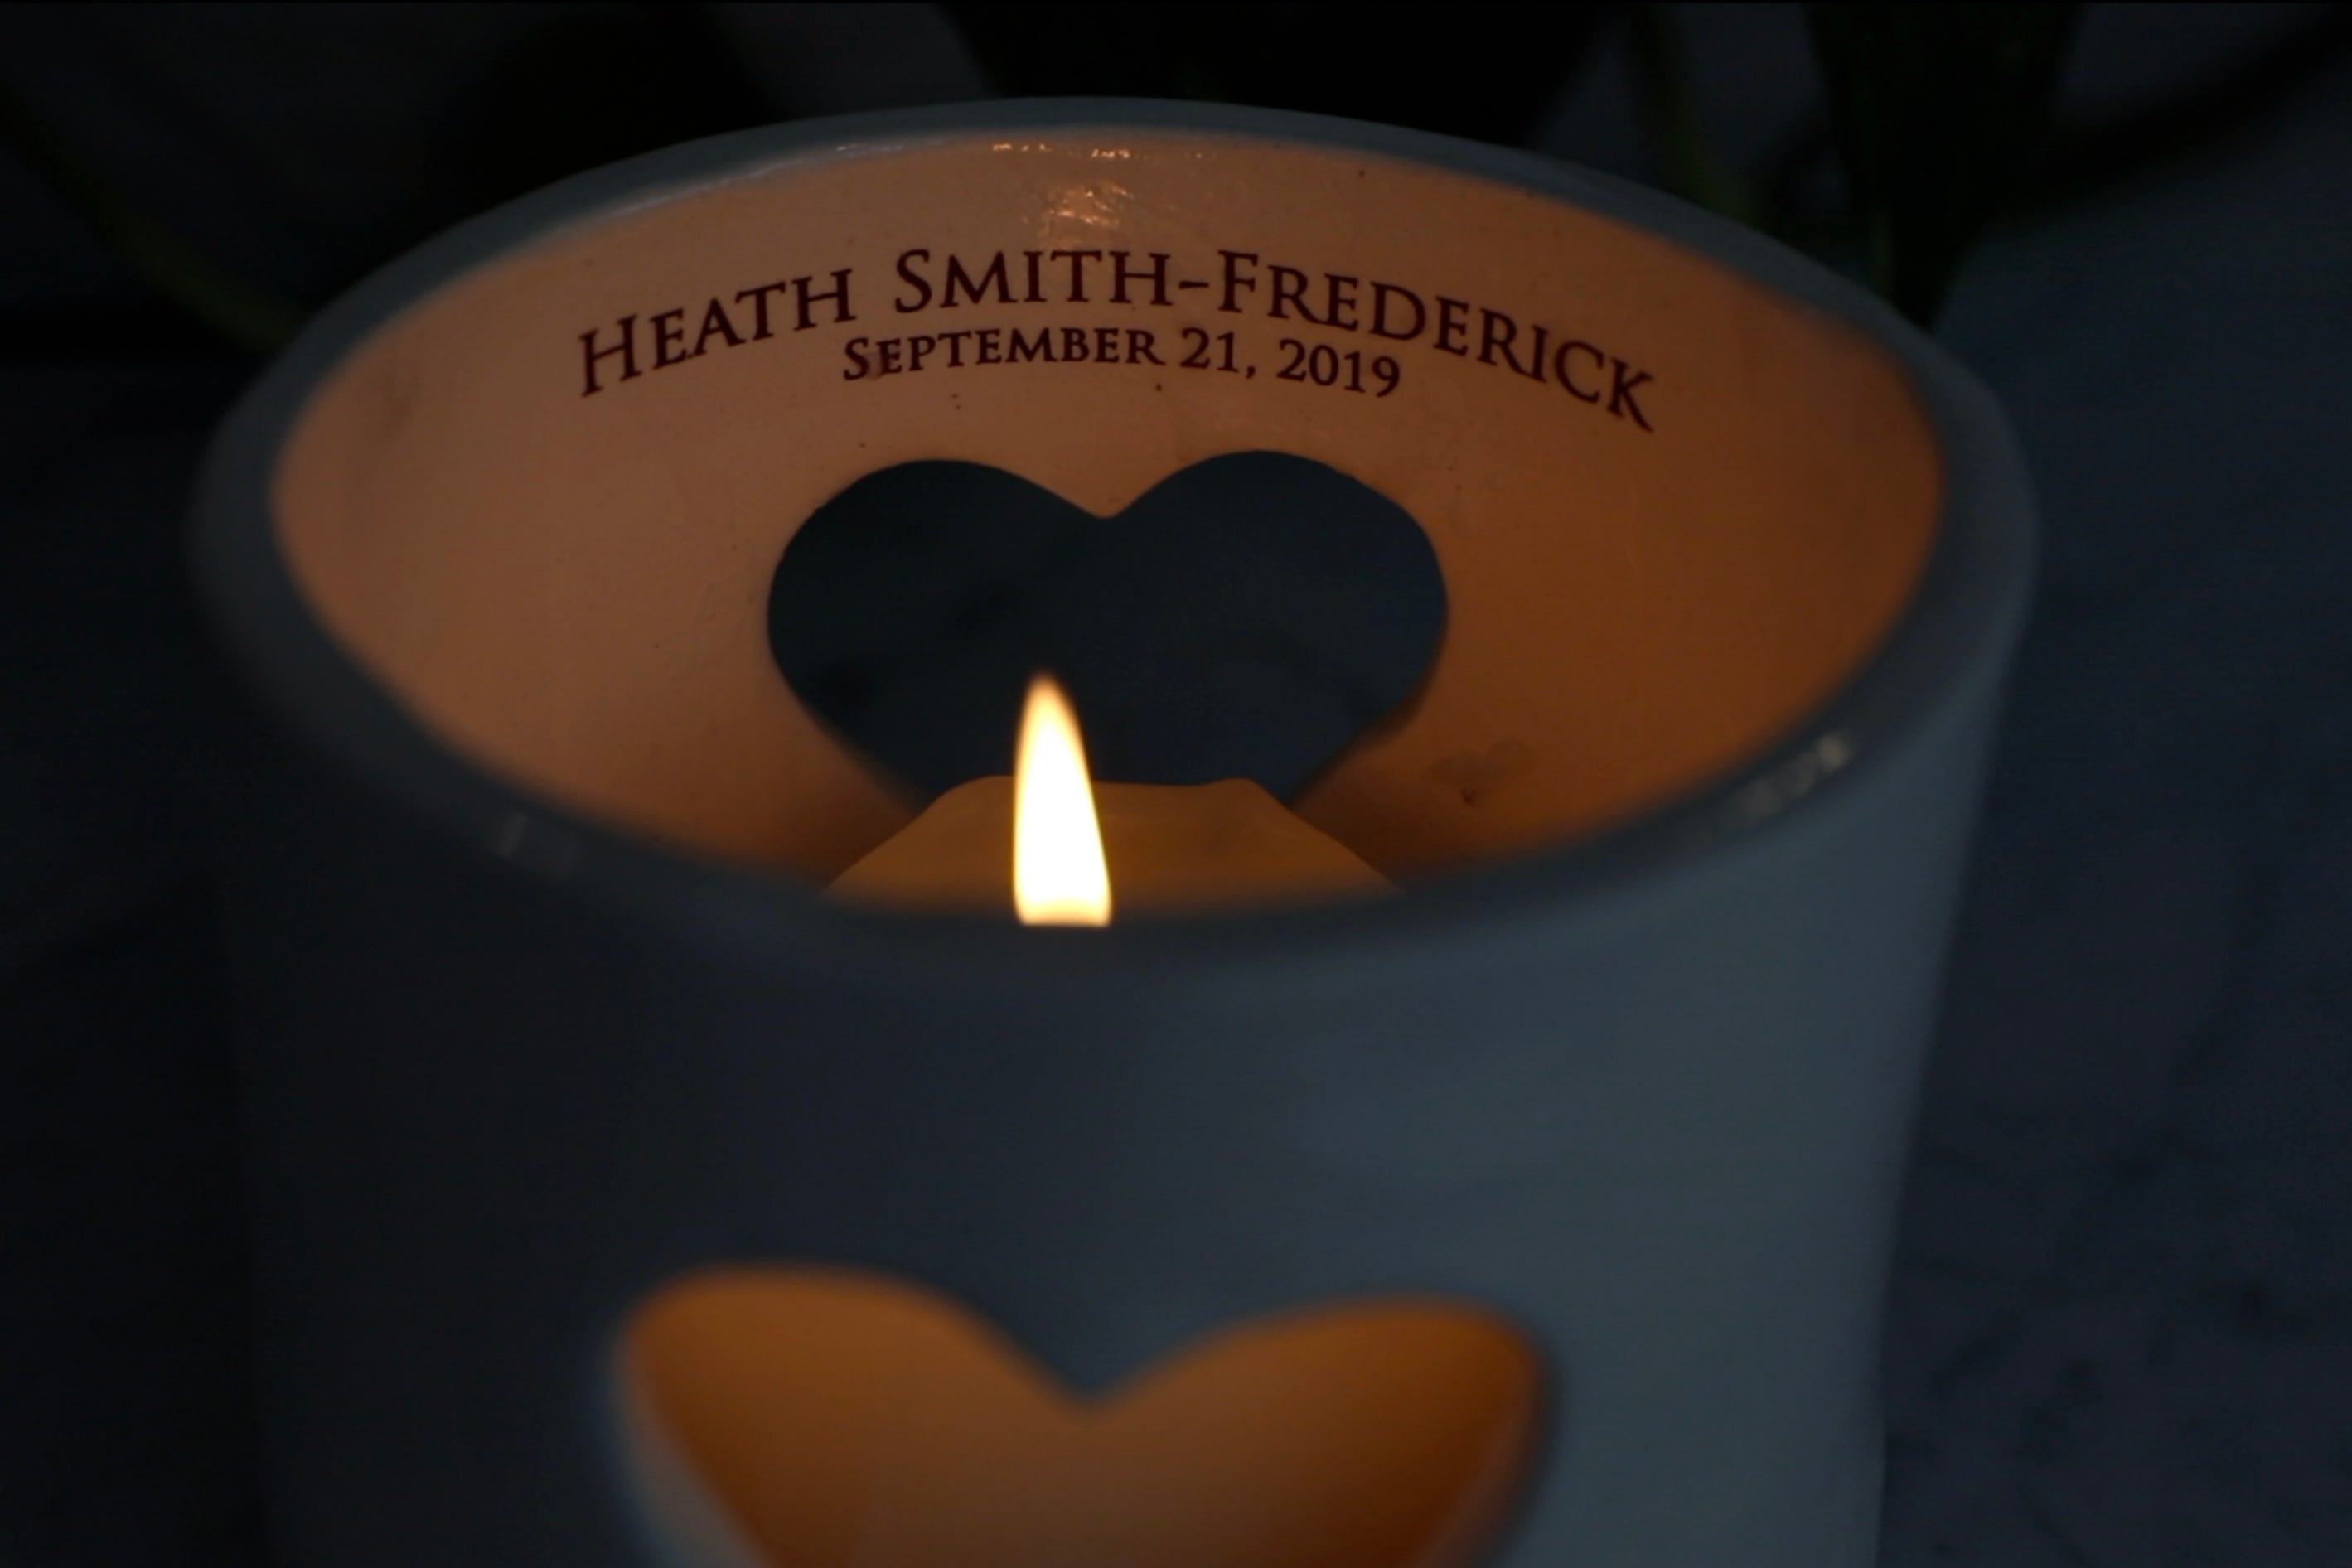 Marny Smith, 38, had a stillbirth in 2019. A candle in memory of her son, Heath, sits on the kitchen counter June 22, 2022 in Larchmont.